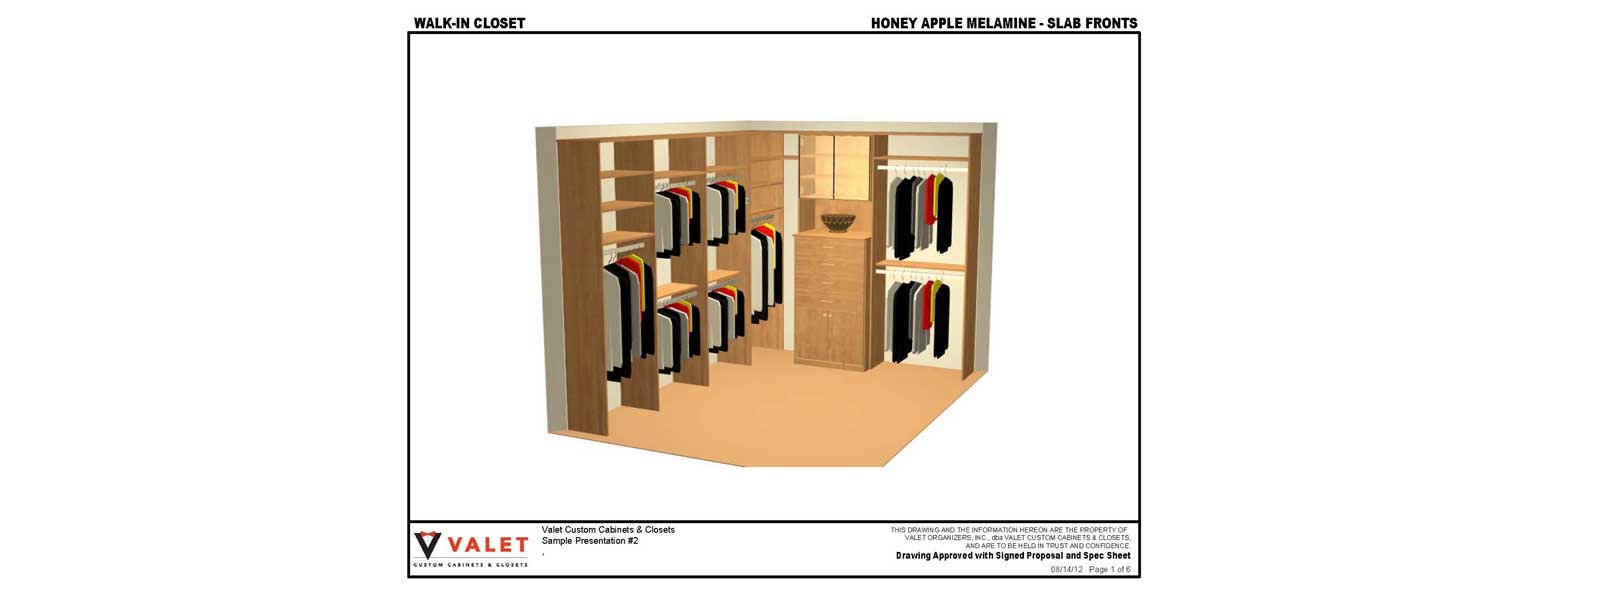 Design Examples Of Custom Closets By Valet Custom Cabinets Closets